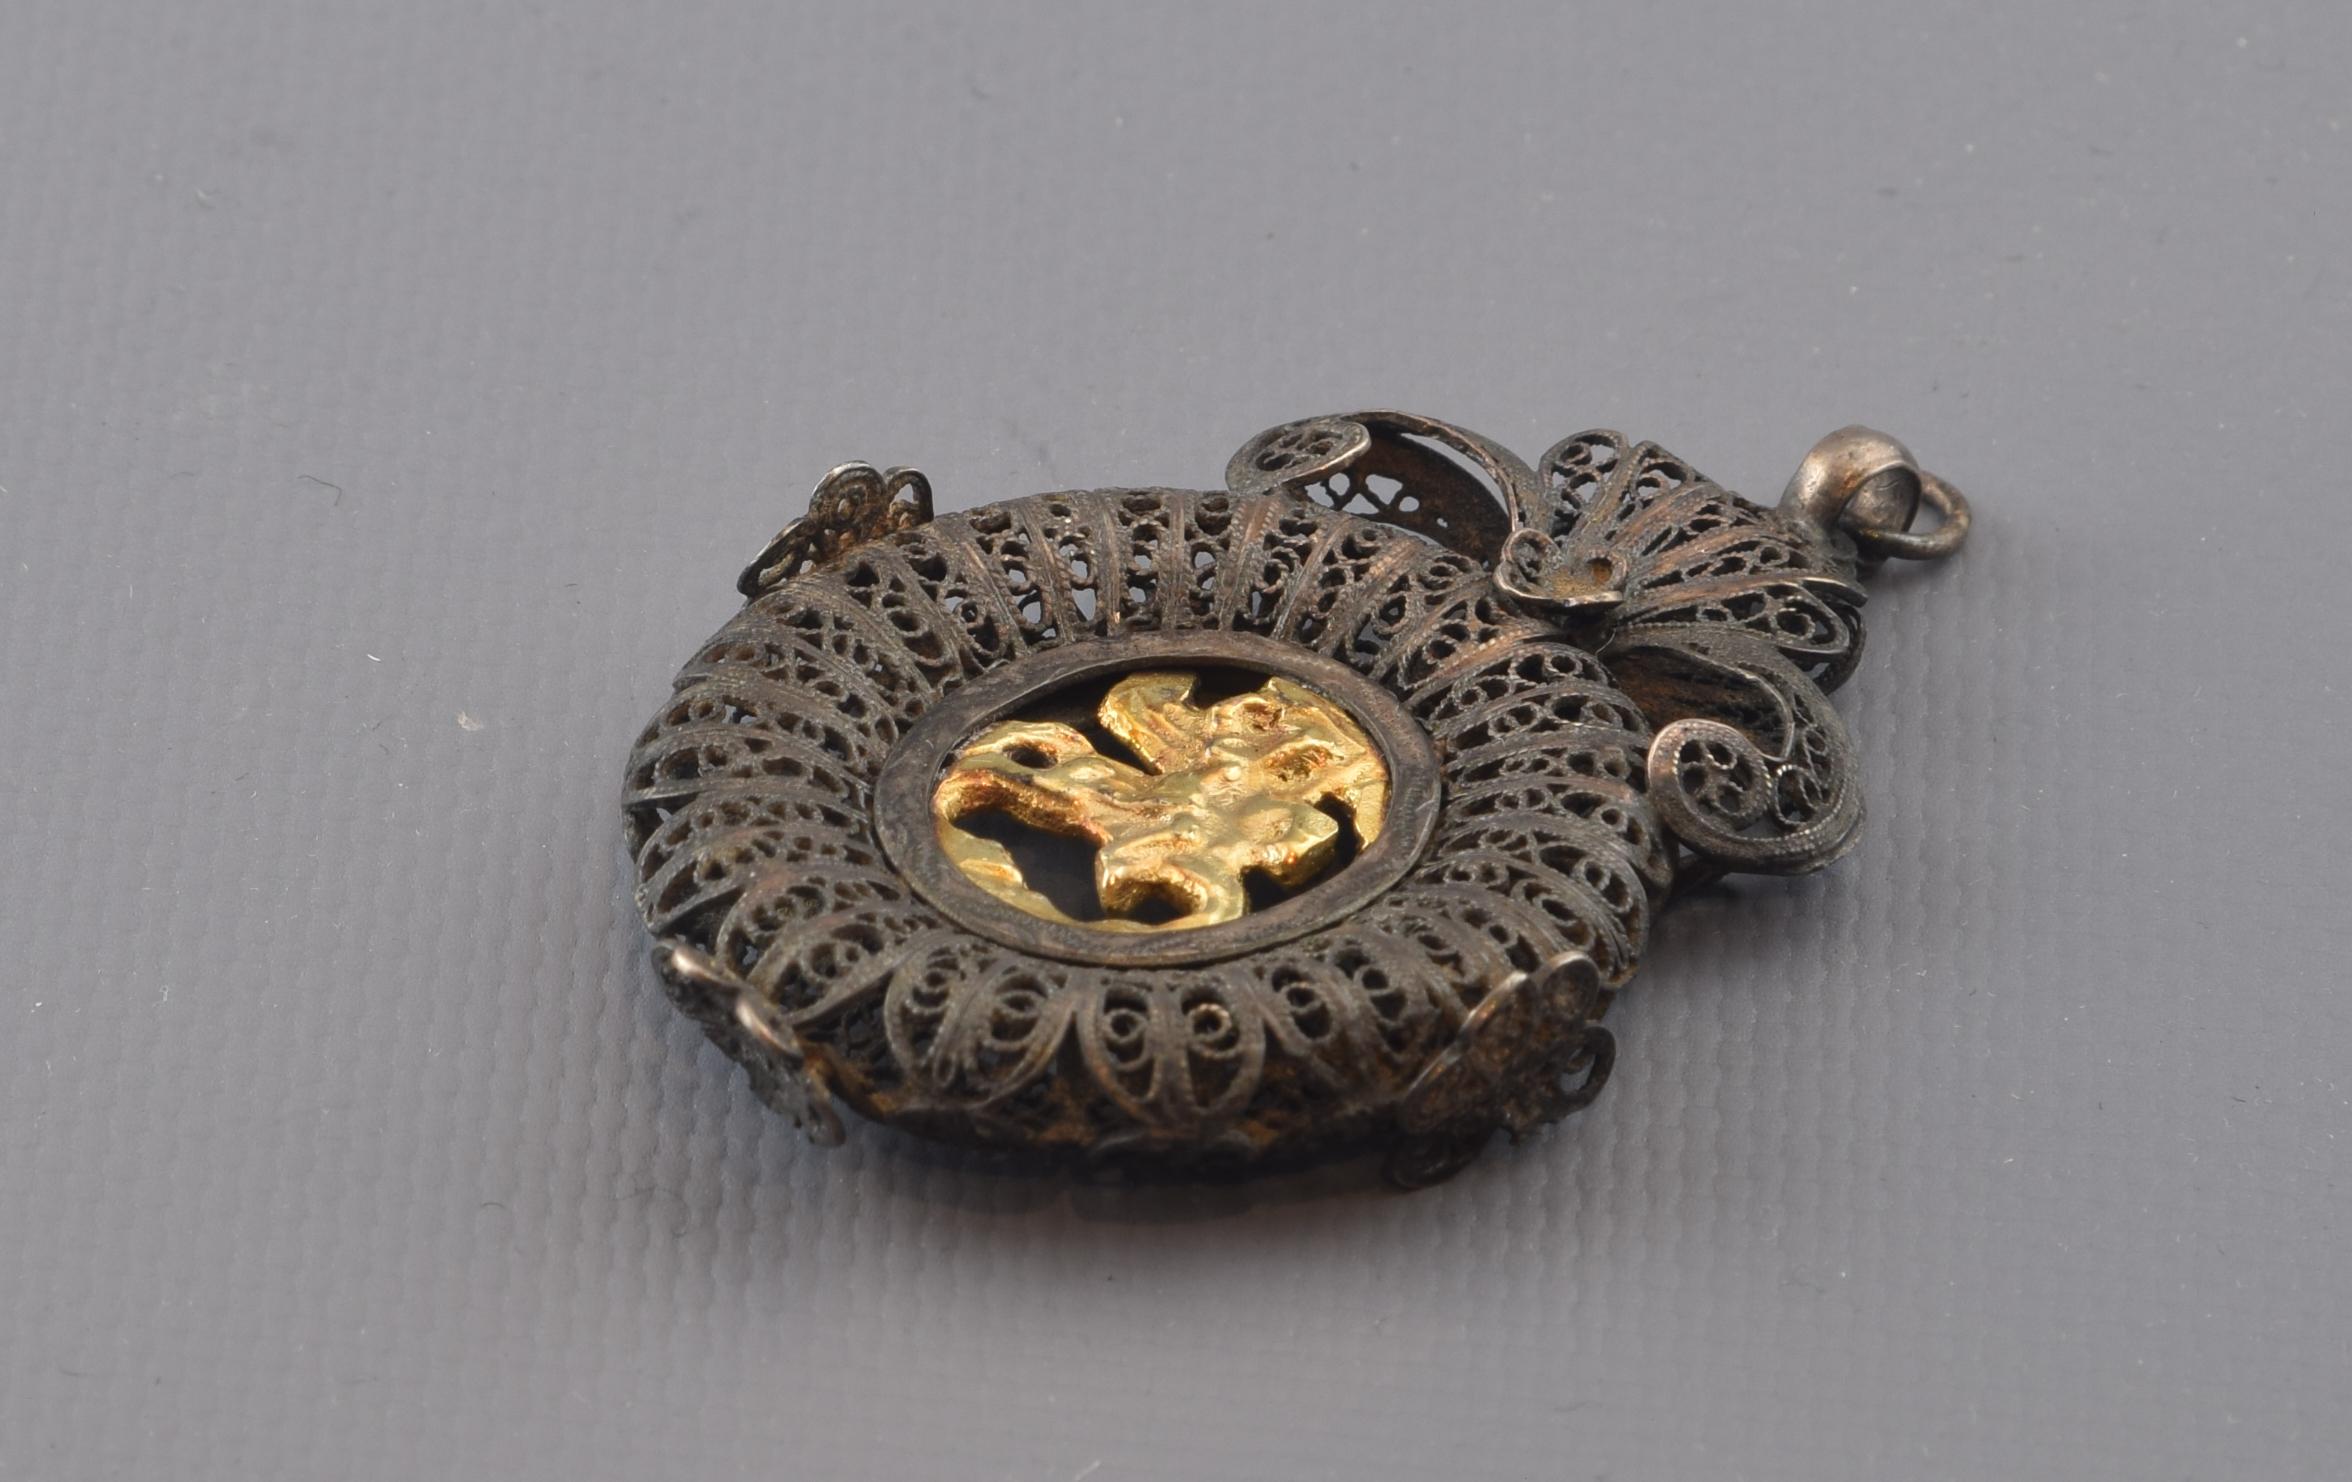 European Devotional Pendant with St. George, Silver, 19th Century